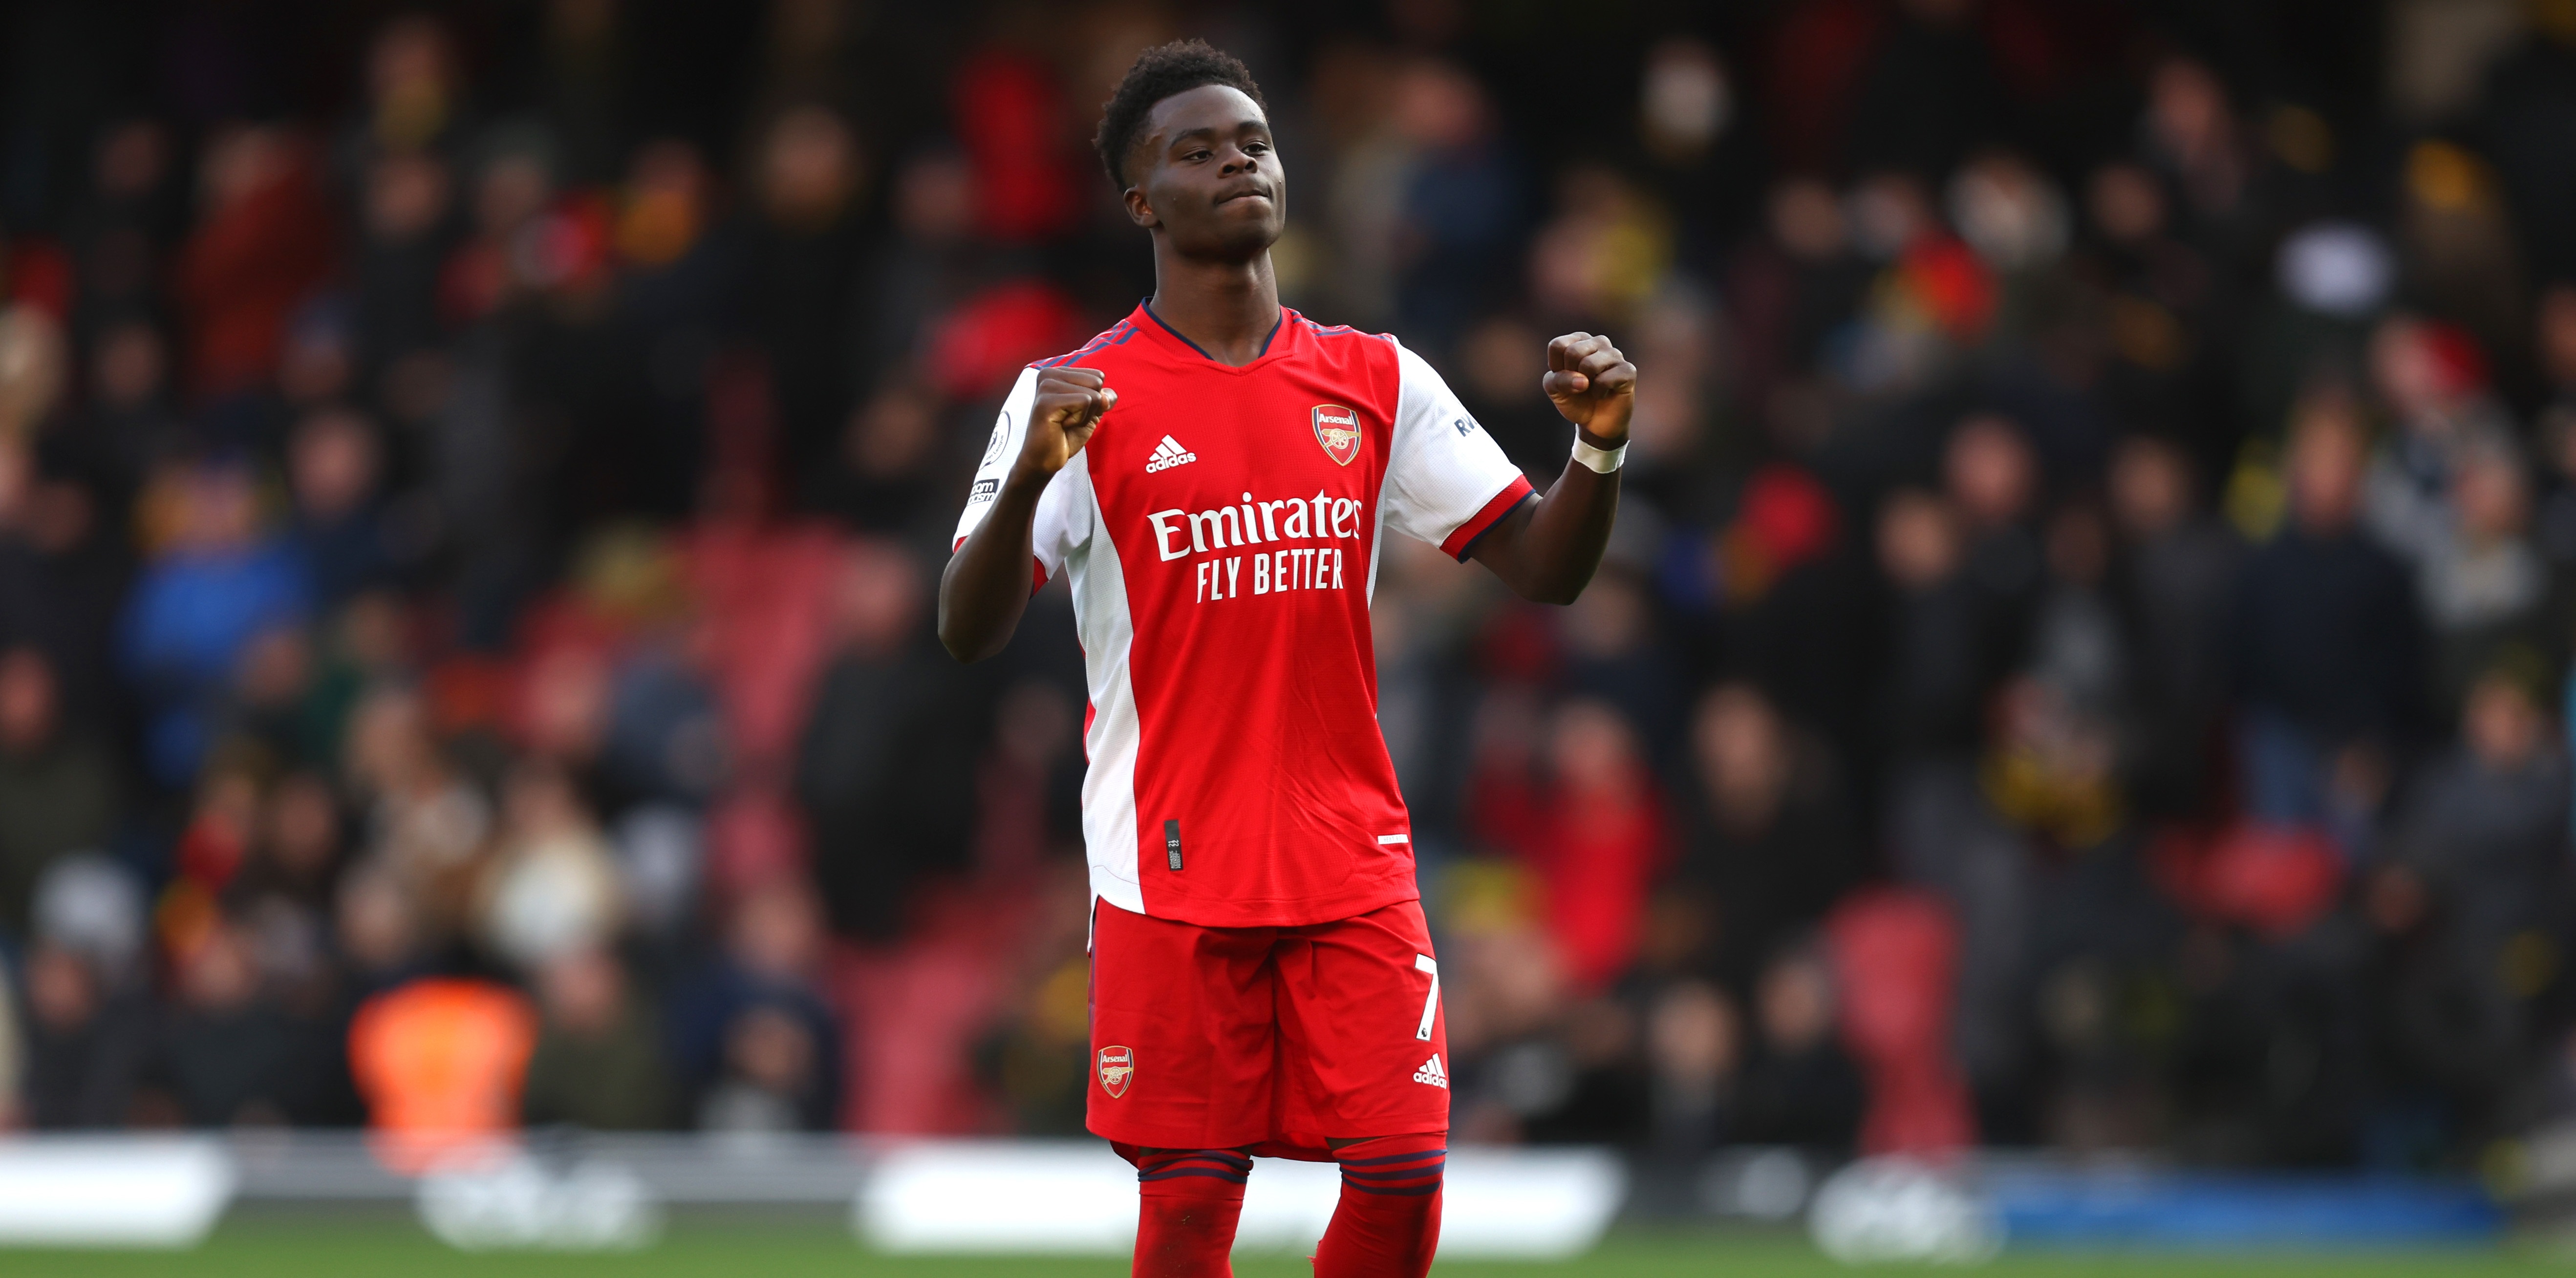 Liverpool links to Bukayo Saka addressed by Guardian journalist; something ‘seismic’ would need to happen to see him move to Anfield